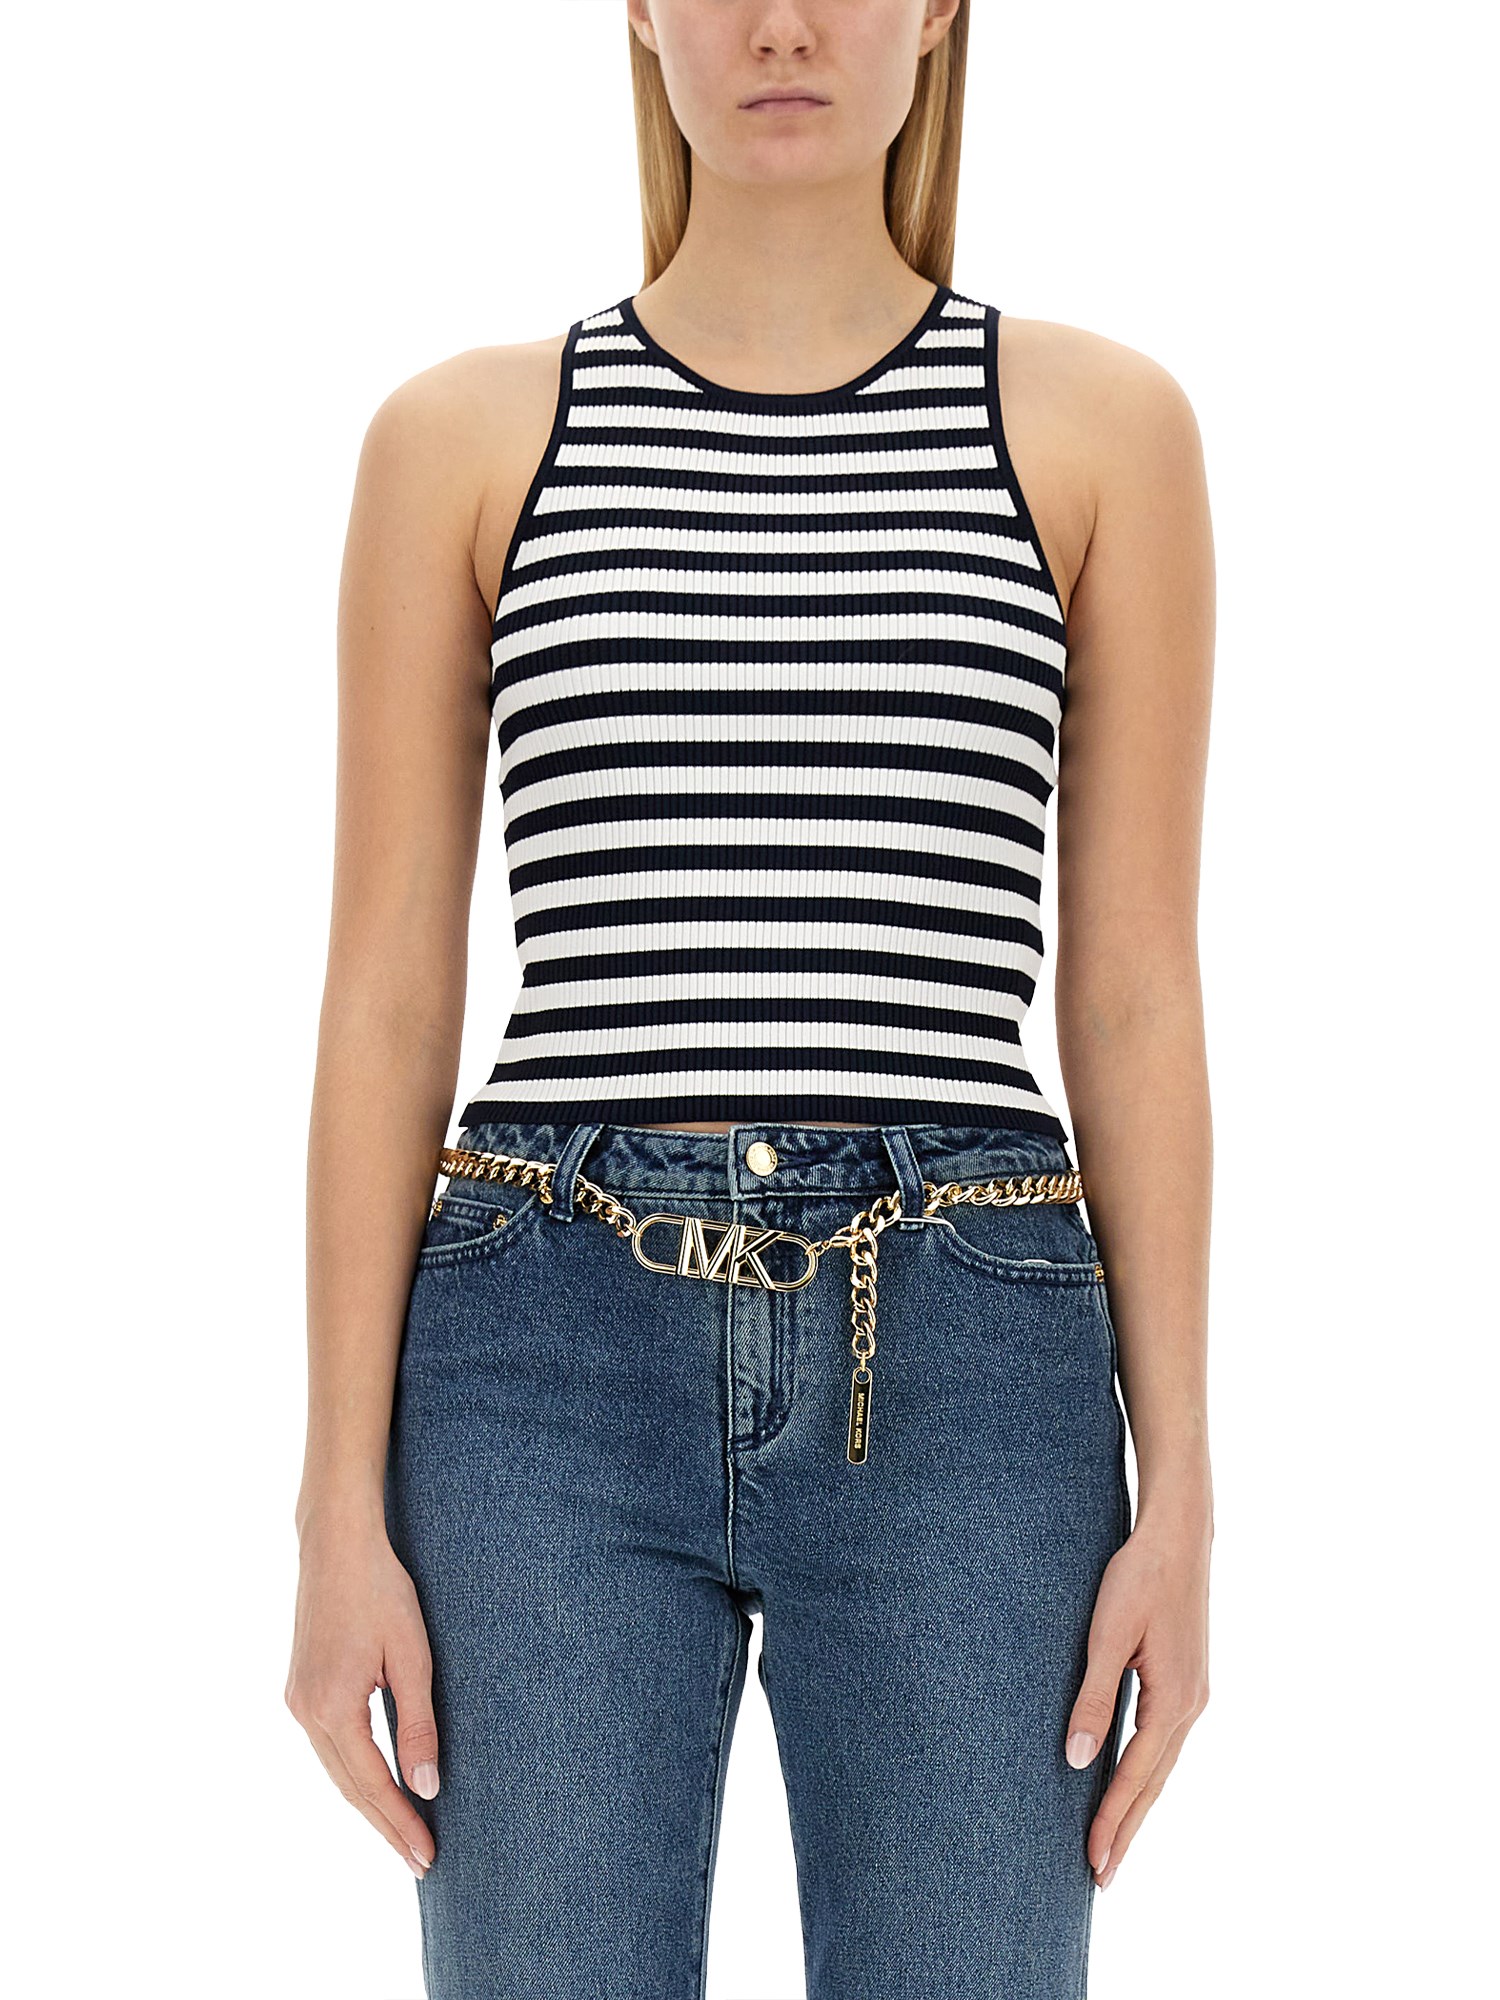 michael by michael kors top with stripe pattern